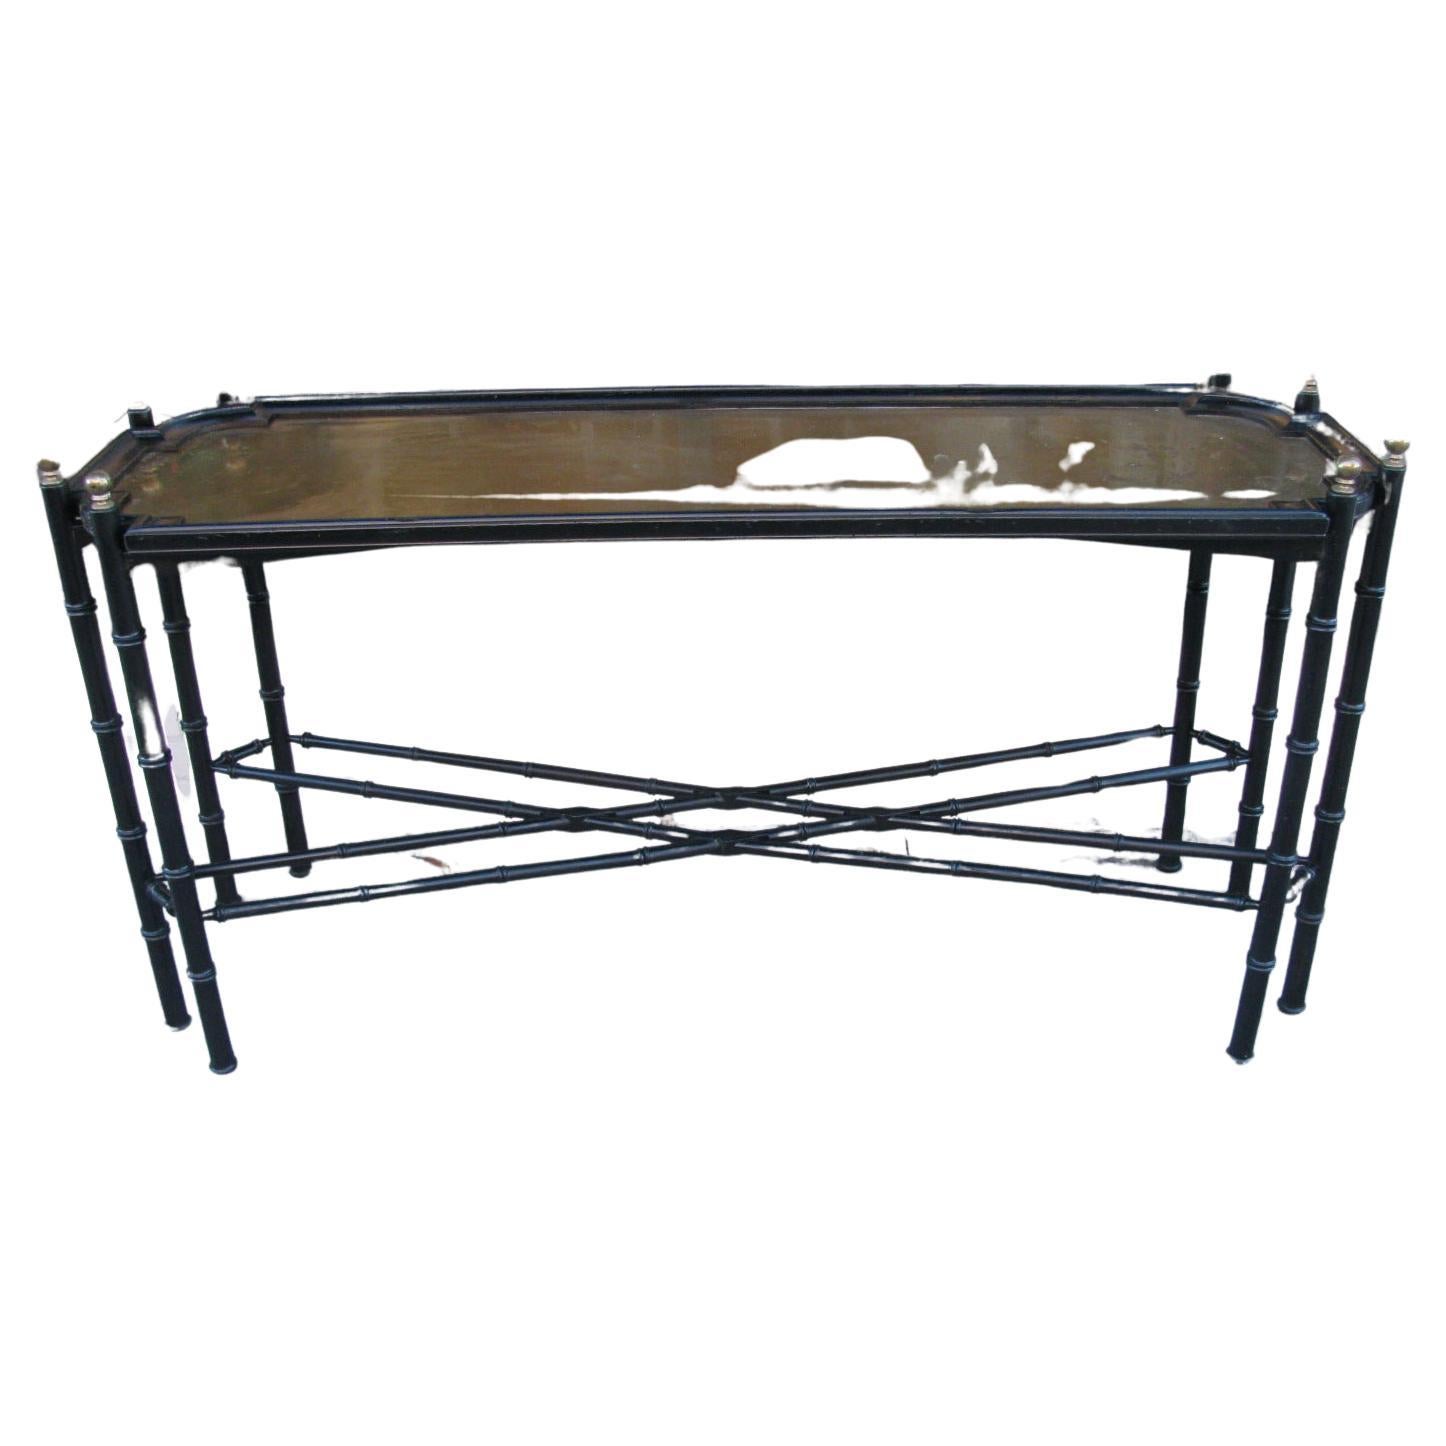 Fabulous 8 leg faux bamboo sofa table with a brass tray top. Black enamel with brass caps atop each leg. Stretchers cross on both bottom and top sections creating X-stretchers. Would work well in numerous settings. Tray is tarnished, can be polished